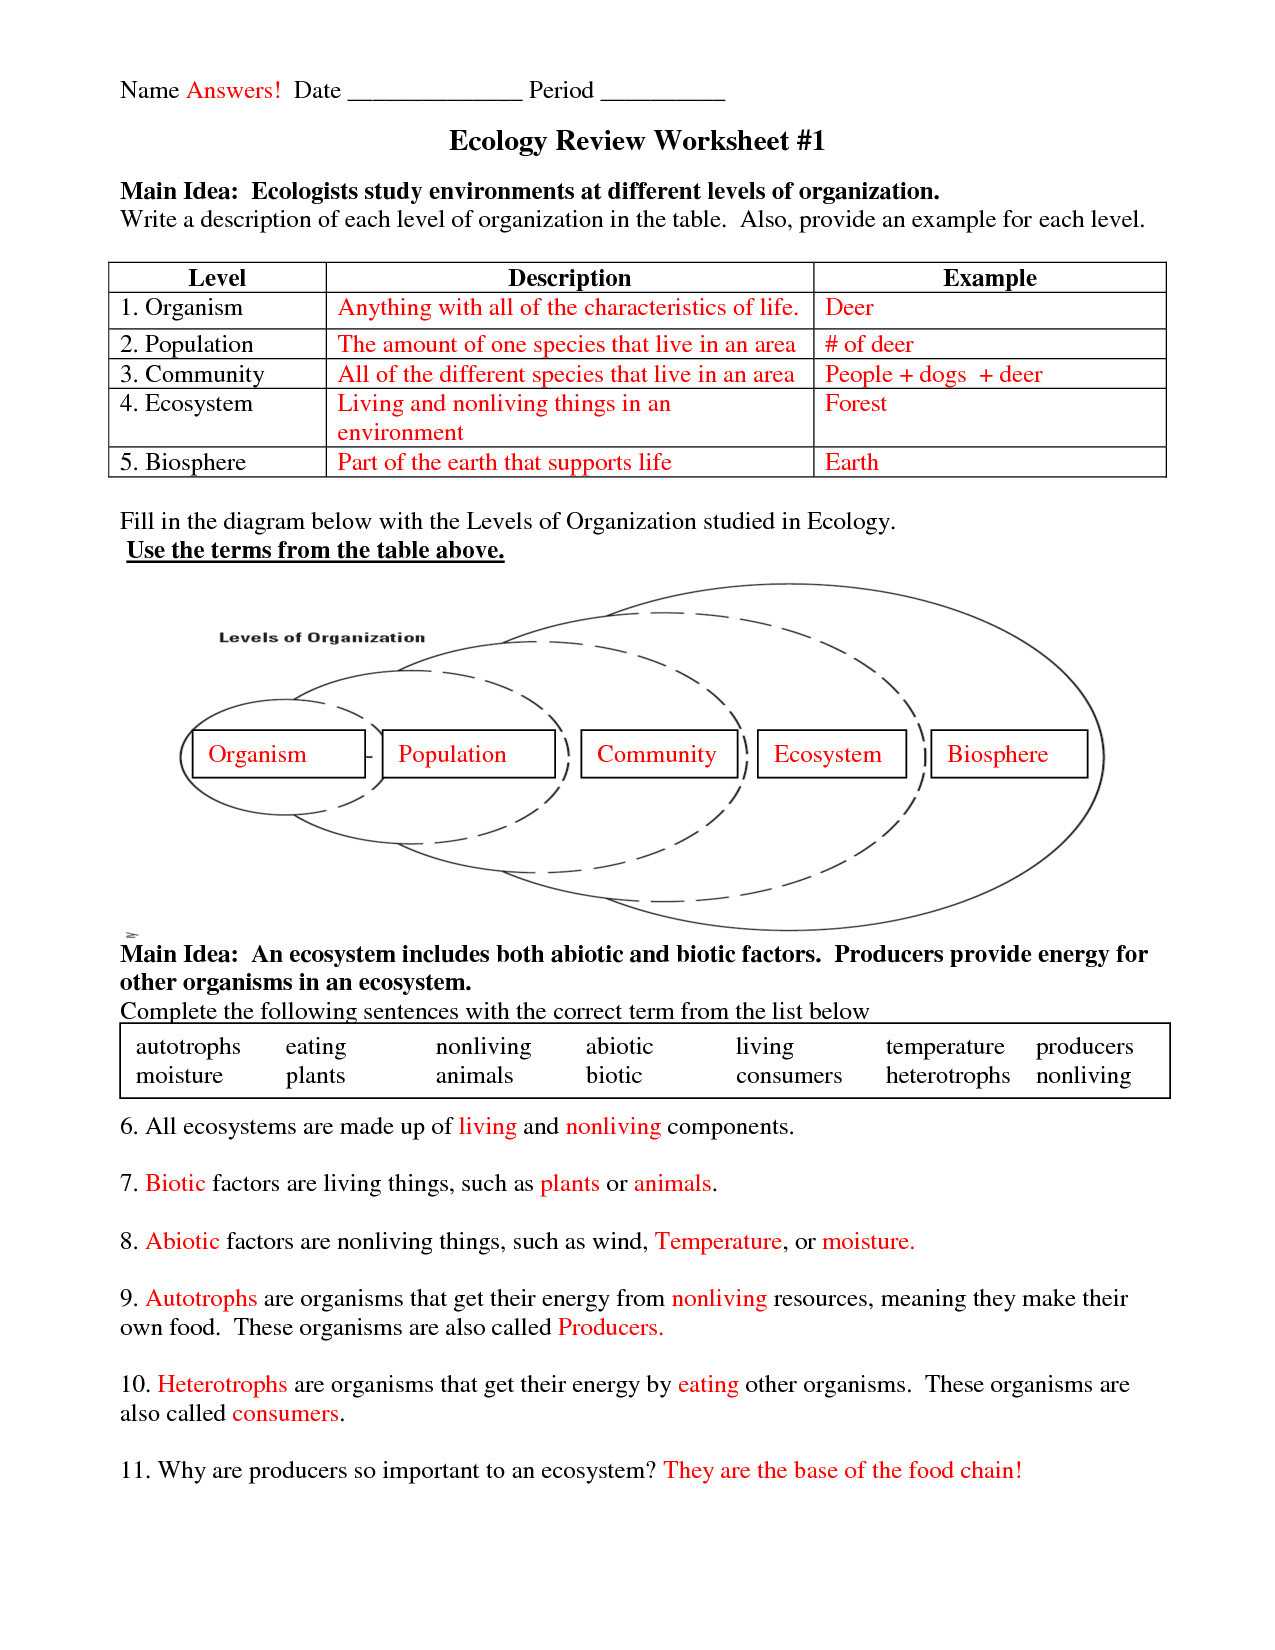 Energy Transformation Worksheet Answers Also Energy Transformation Worksheet Answers New Best 25 Ideas About